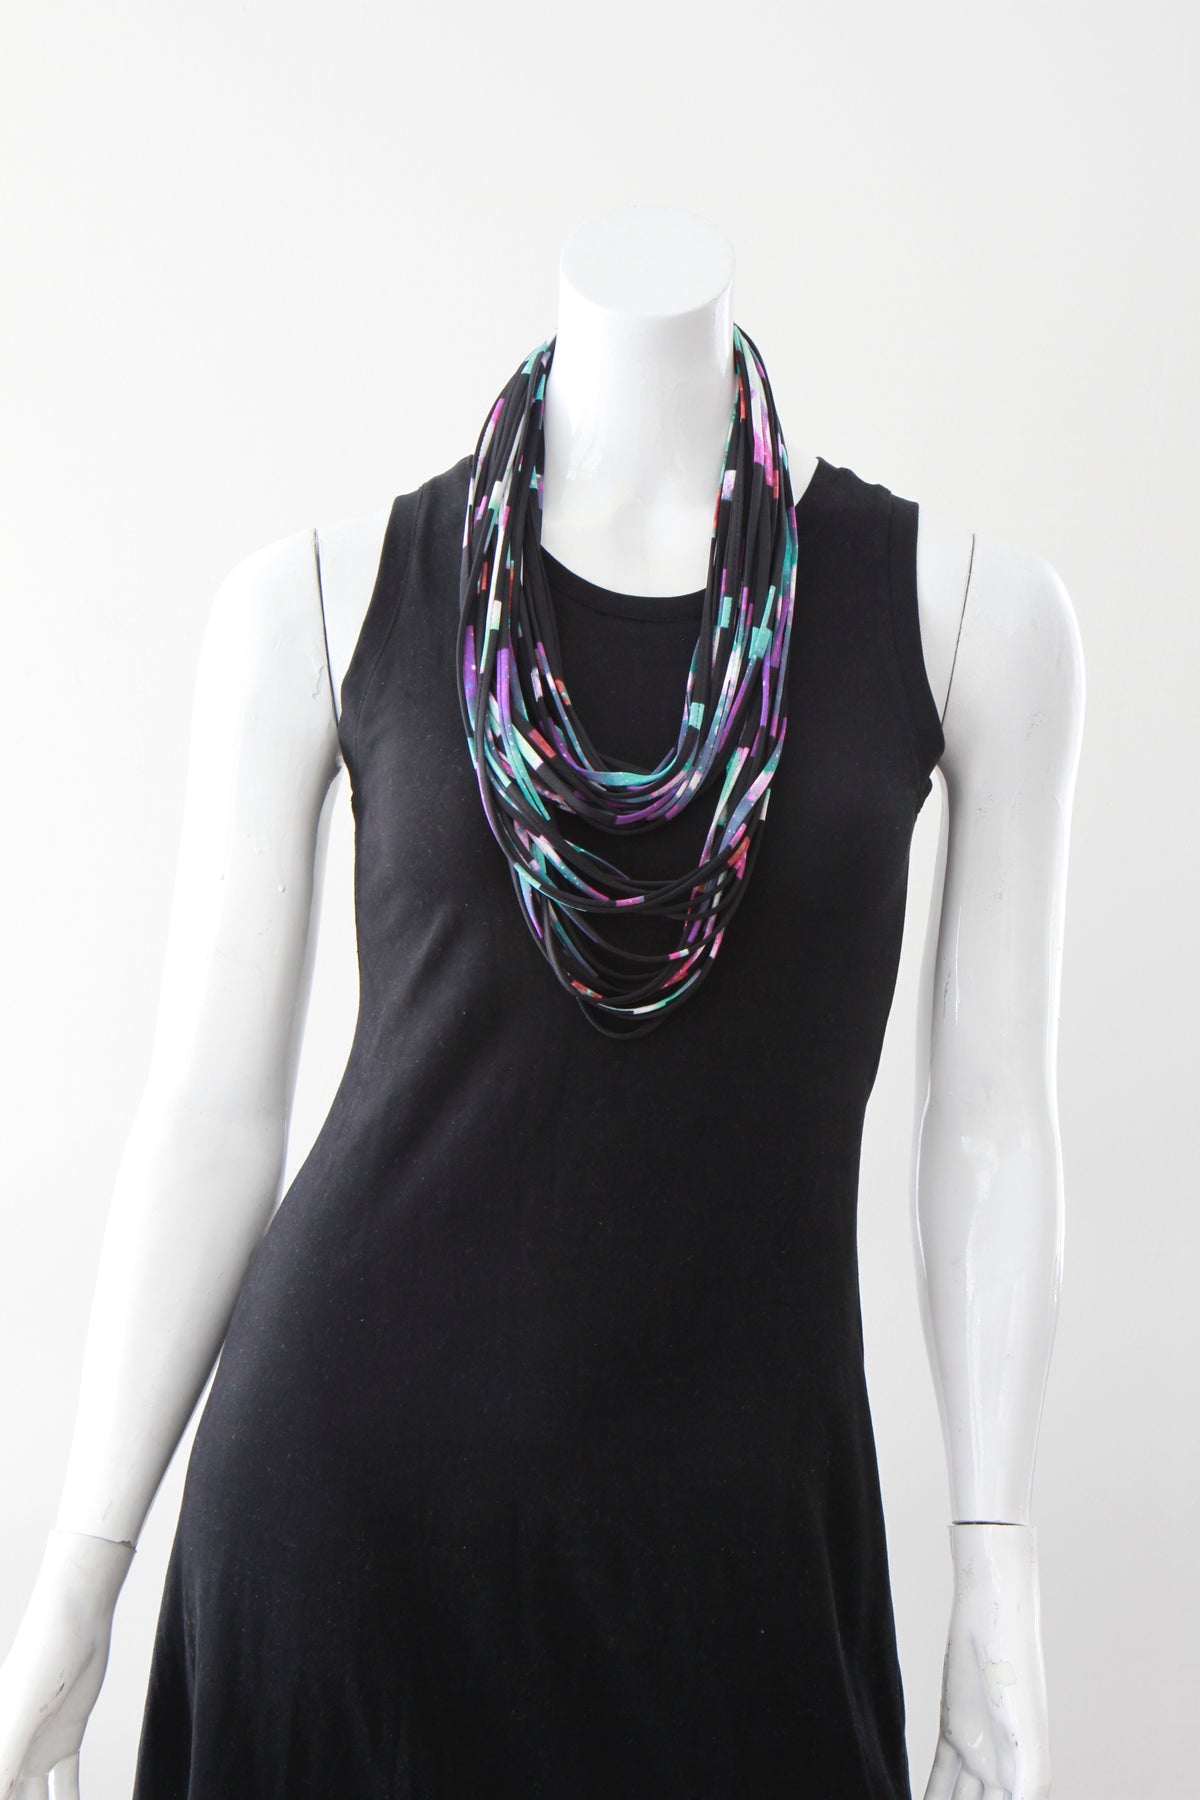 Galaxy Print Infinity Scarf in &#39;Orion&#39;s Belt&#39; Print